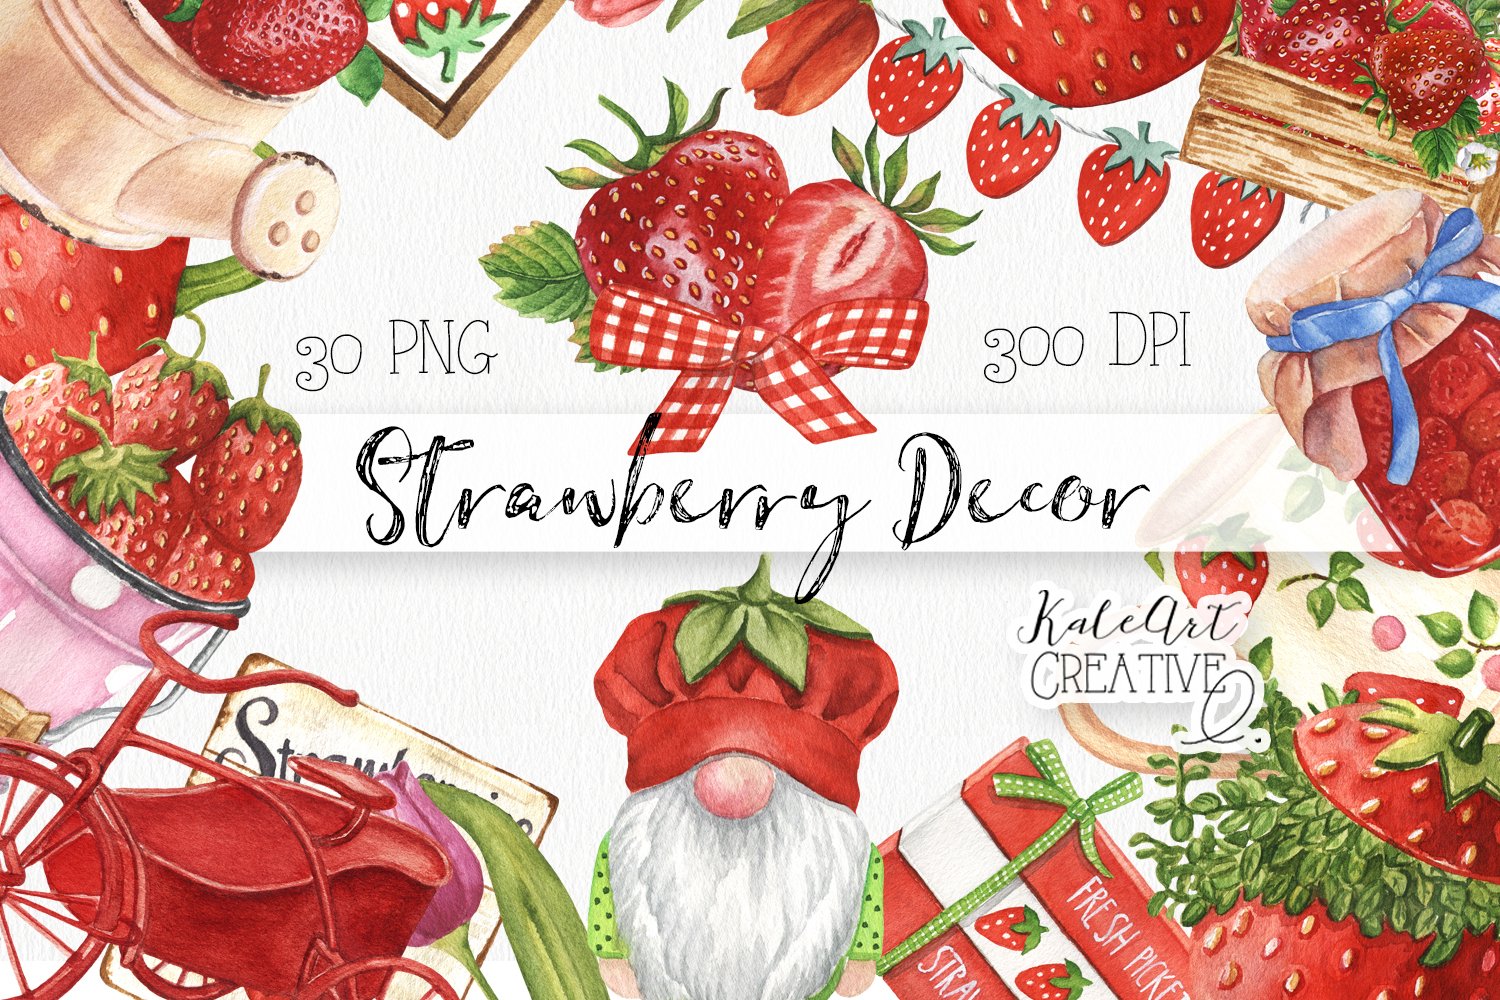 Black lettering "Strawberry Decor" and different red illustrations.